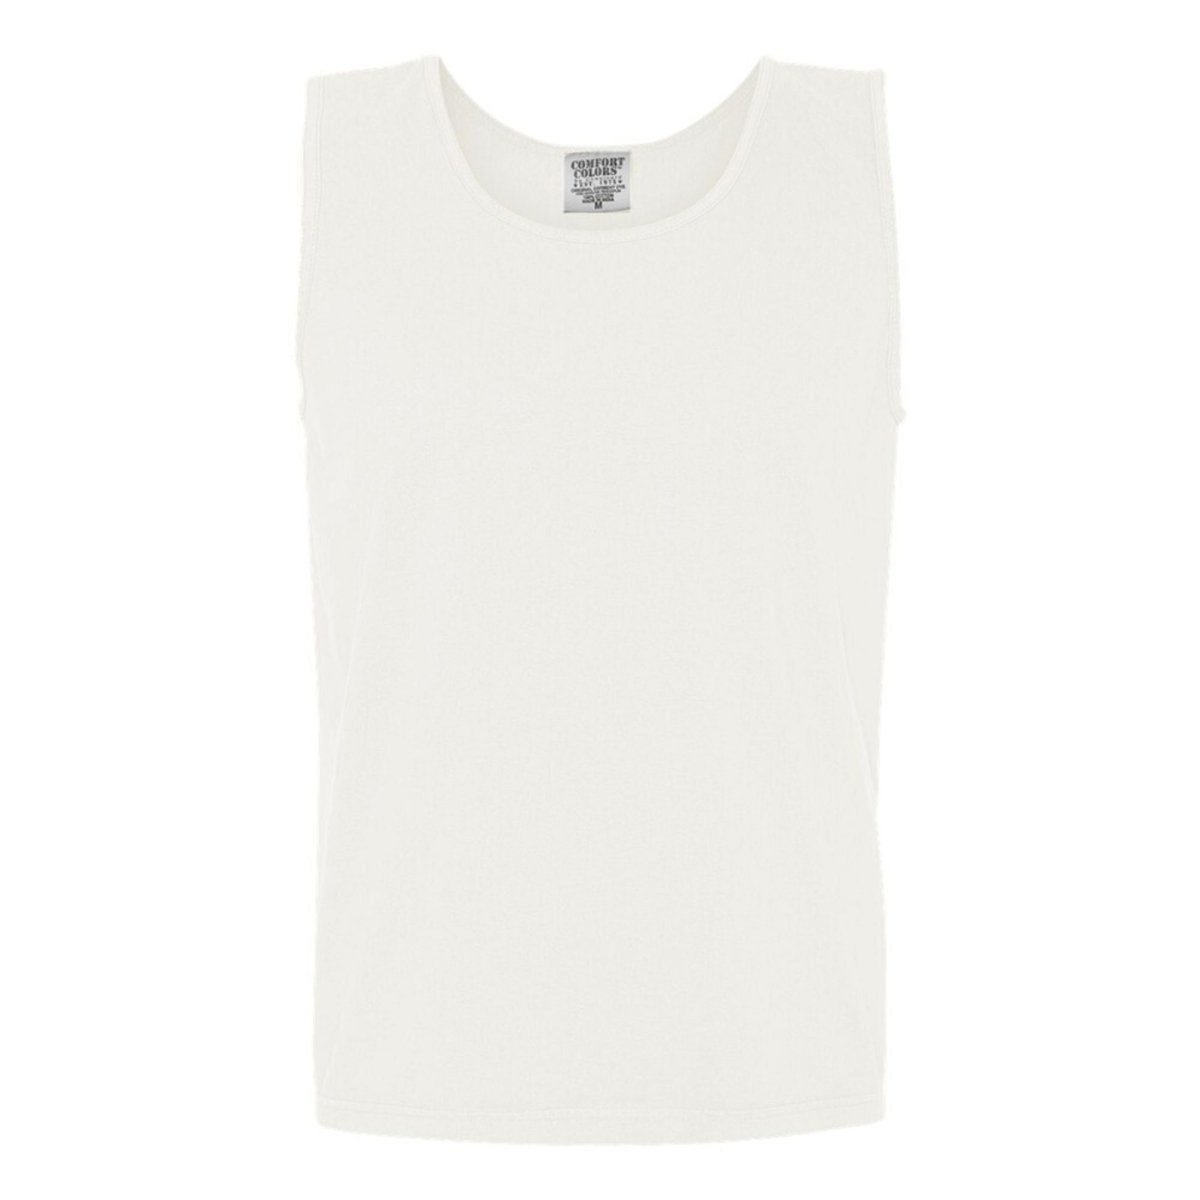 'The Cool Moms Club' PUFF Tank Top - United Monograms